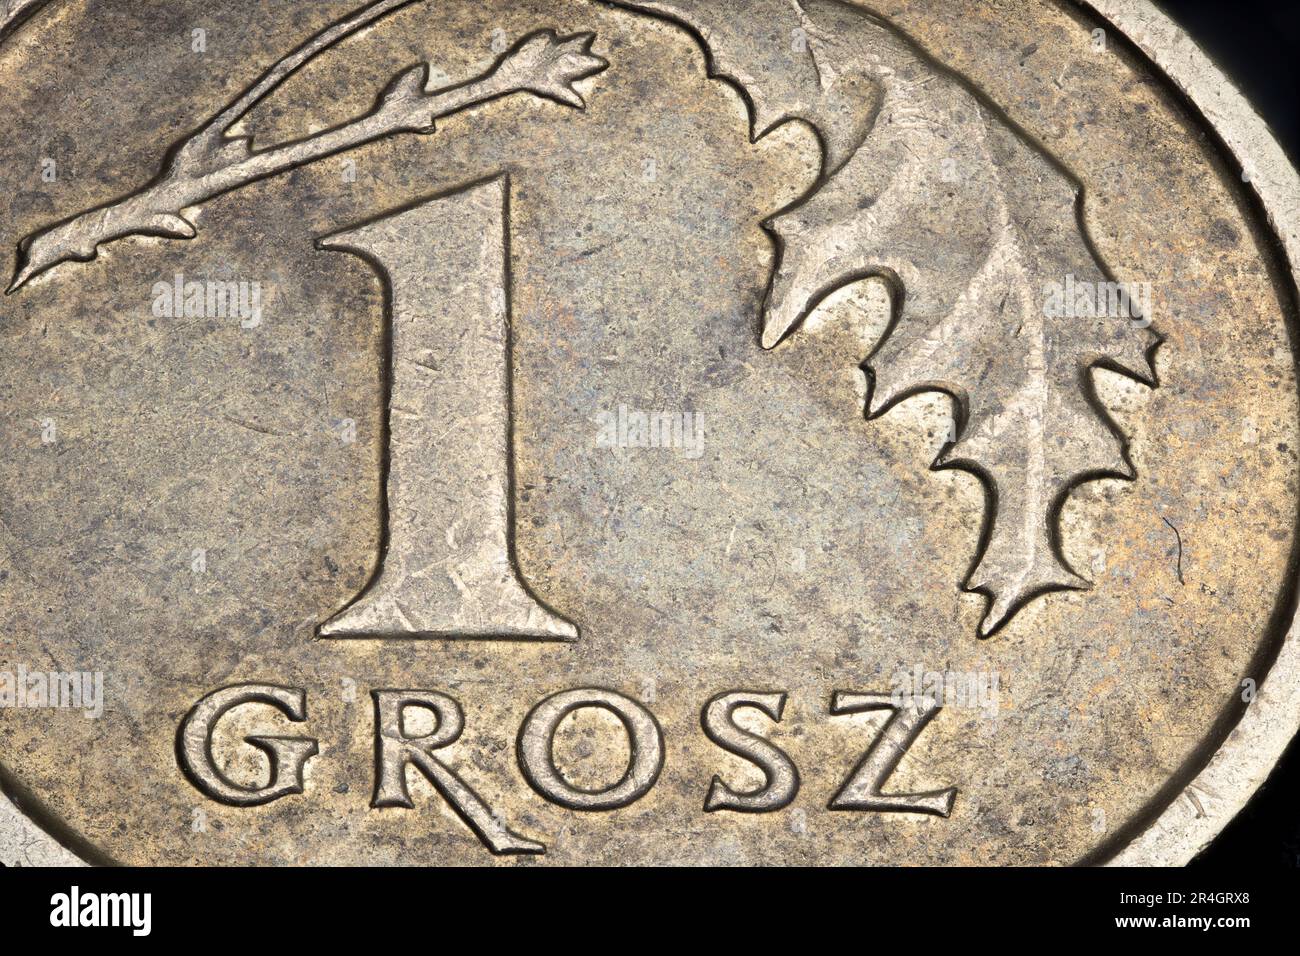 The smallest denomination of a coin from Poland worth 1 grosz, i.e. one hundredth of the Polish zloty PLN, shown close-up in high resolution Stock Photo